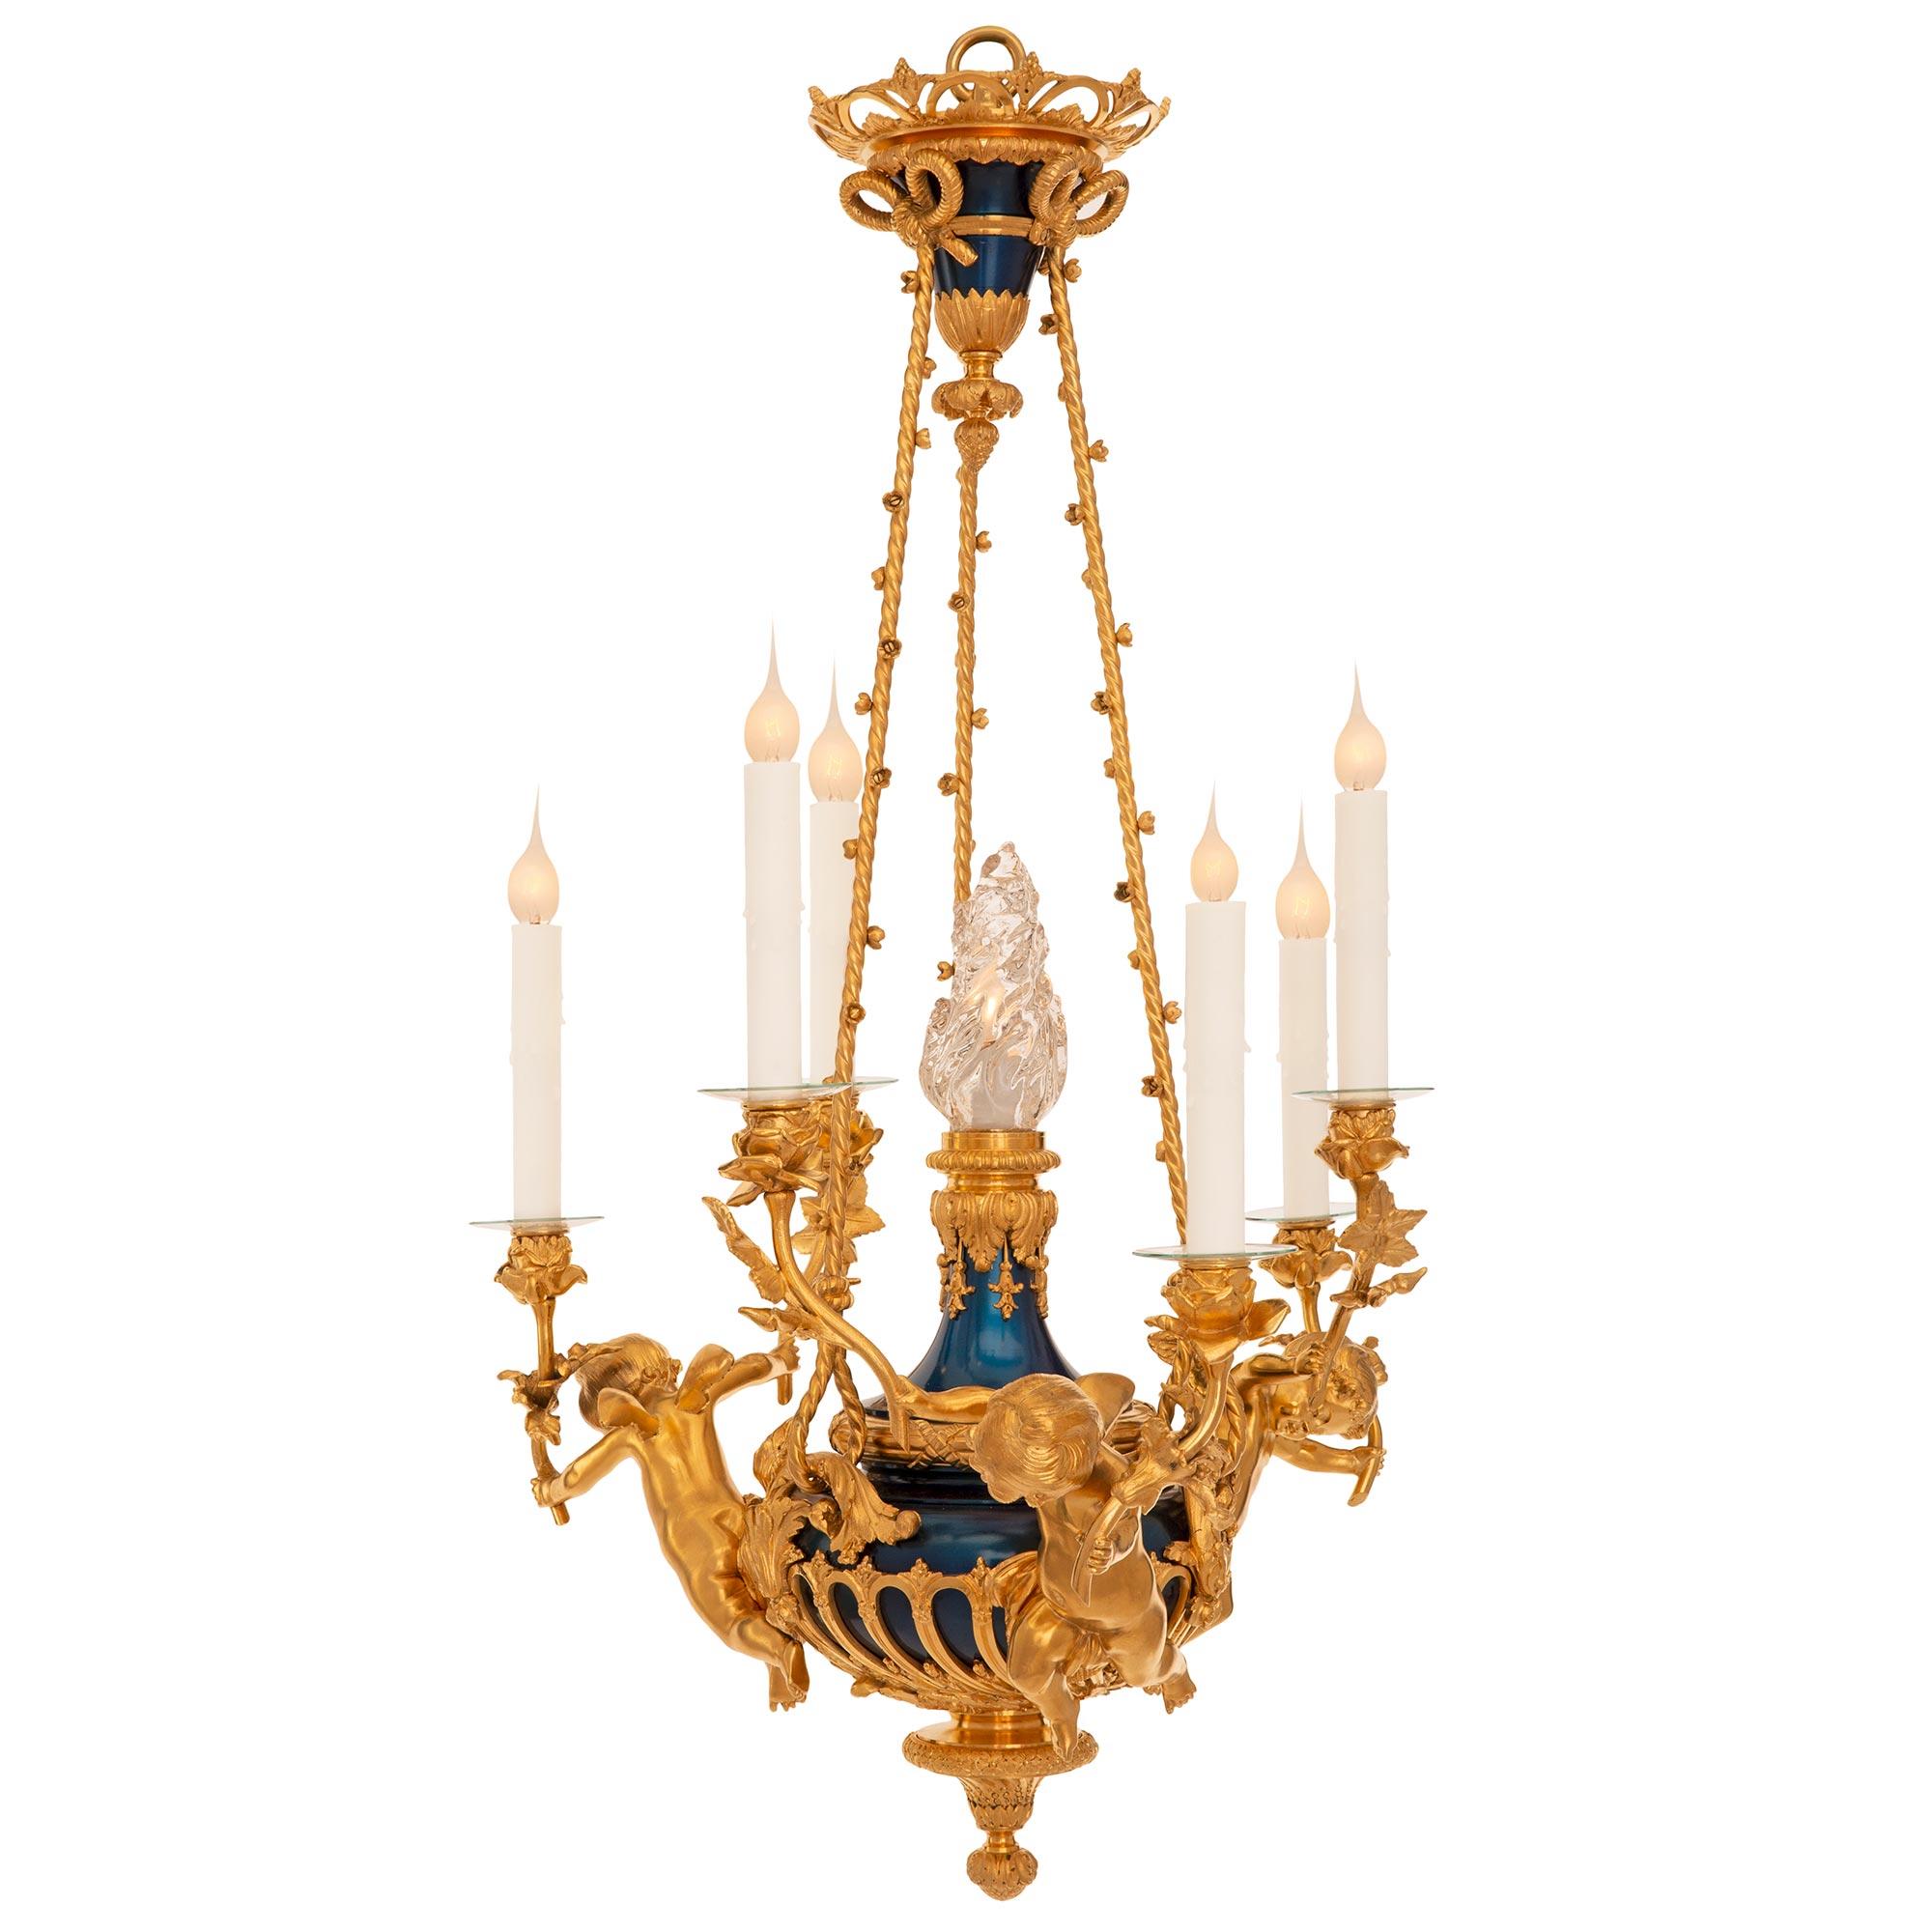 A stunning and extremely decorative French 19th century Louis XVI st. ormolu, enameled bronze and crystal chandelier. The six arm seven light chandelier is centered by an elegant finely detailed bottom mottled foliate finial with a lovely wrap